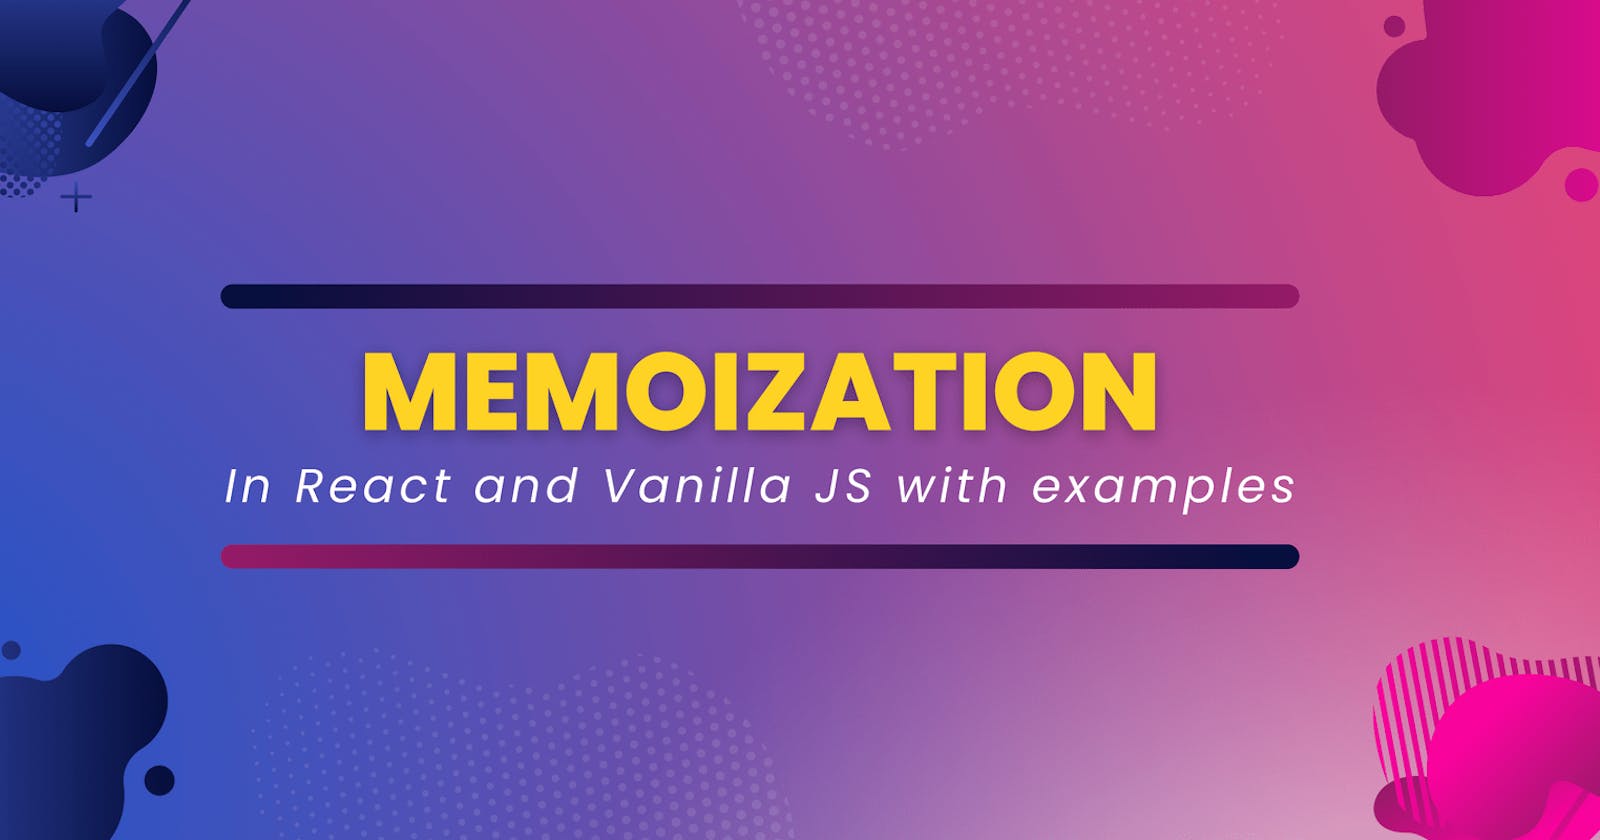 How to implement Memoization in React and vanilla JS to optimize your web app